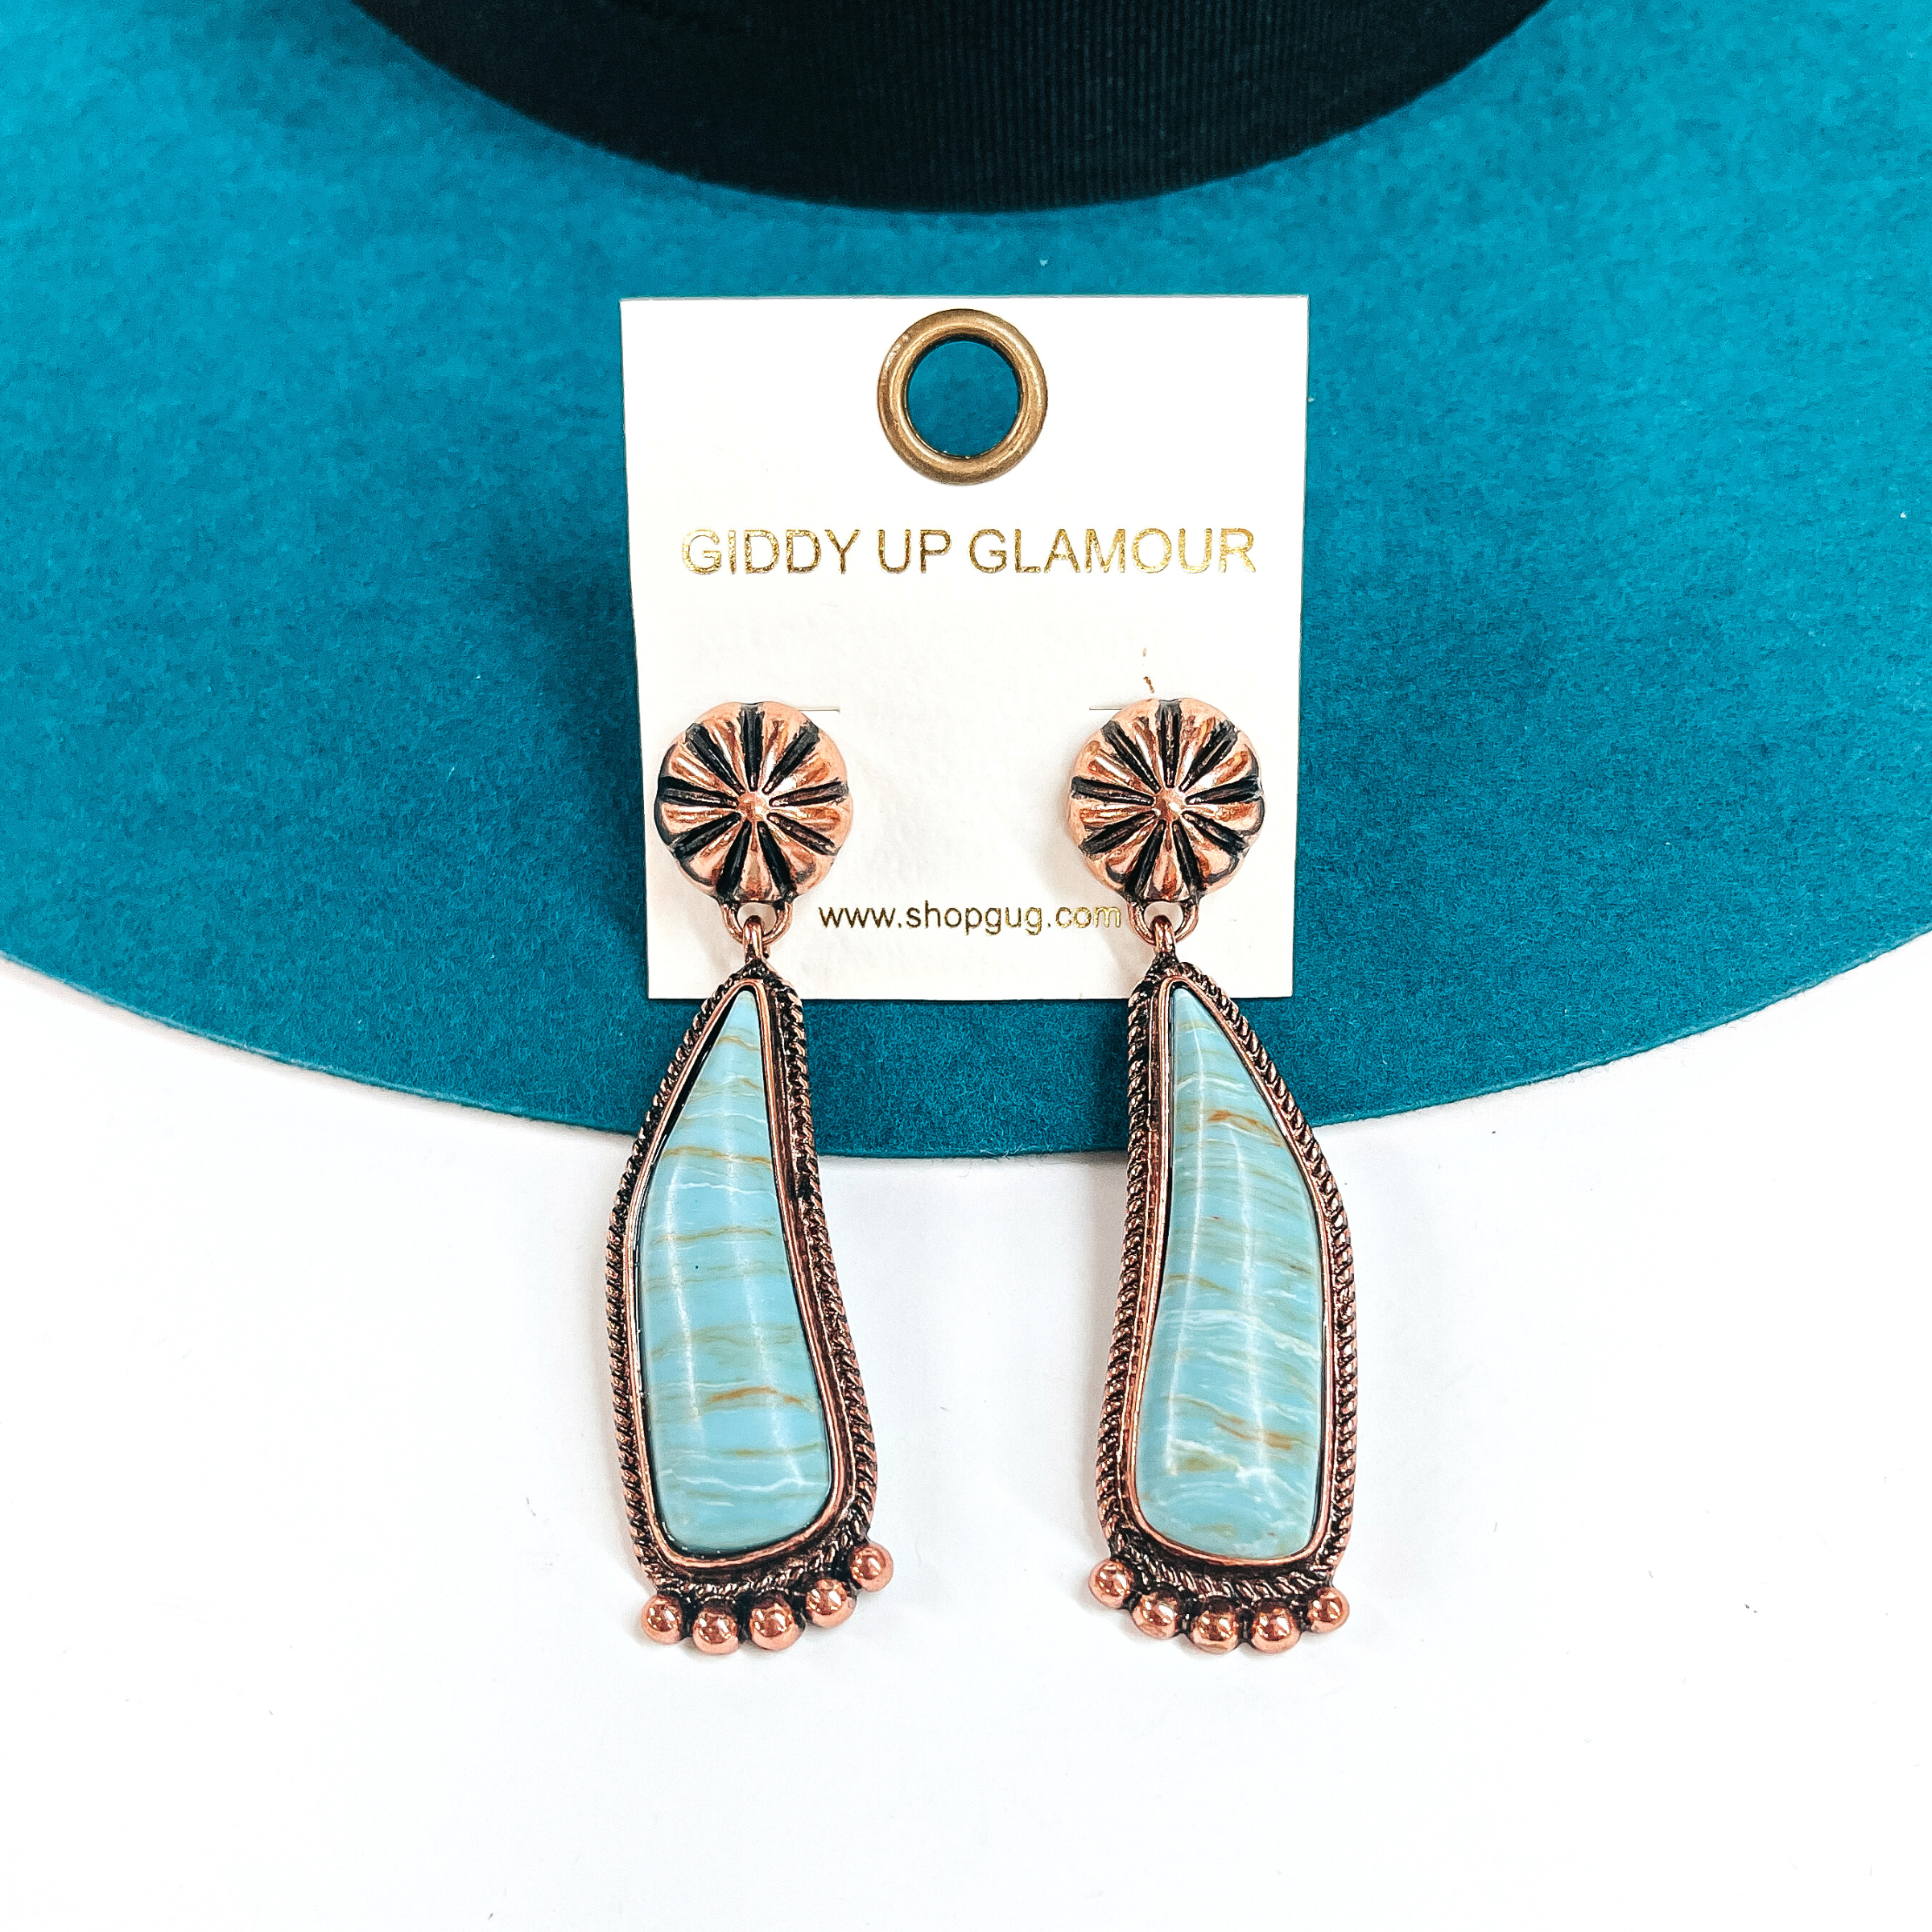 These are copper conch post earrings with a turquoise-marble stone drop earrings in a  copper setting. They have copper details in the bottom and they ae slightly curved.  These earrings are taken laying on a teal felt hat and on a white background.